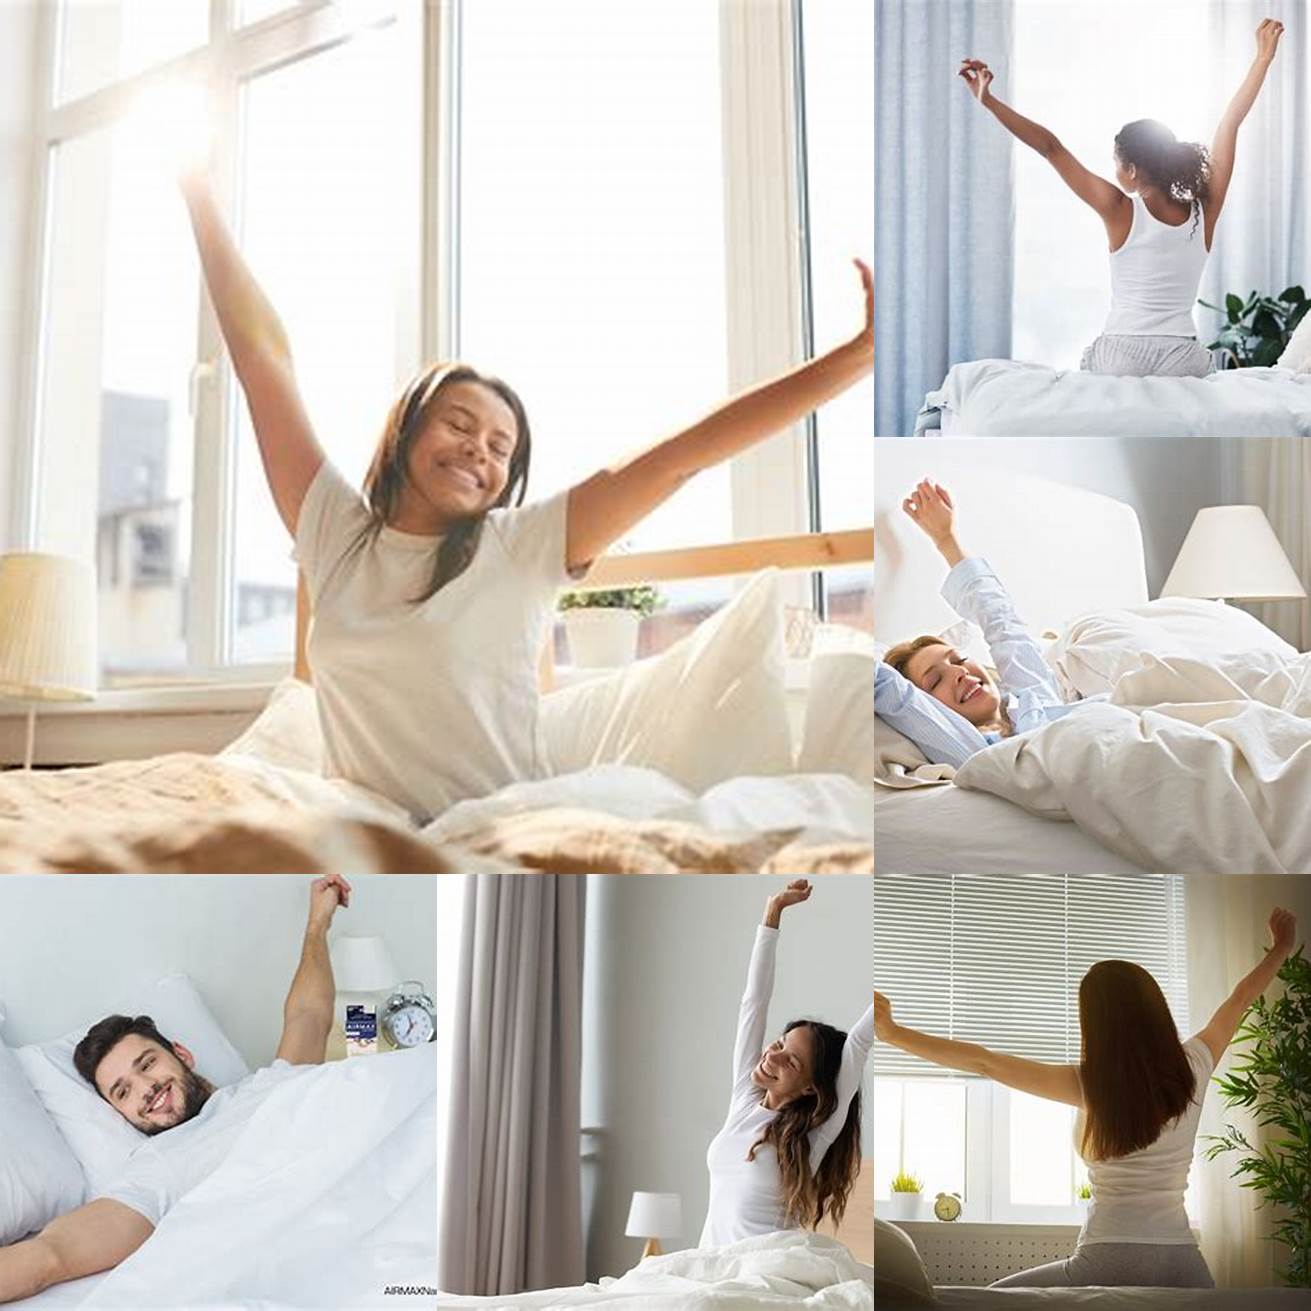 A person waking up refreshed and energized